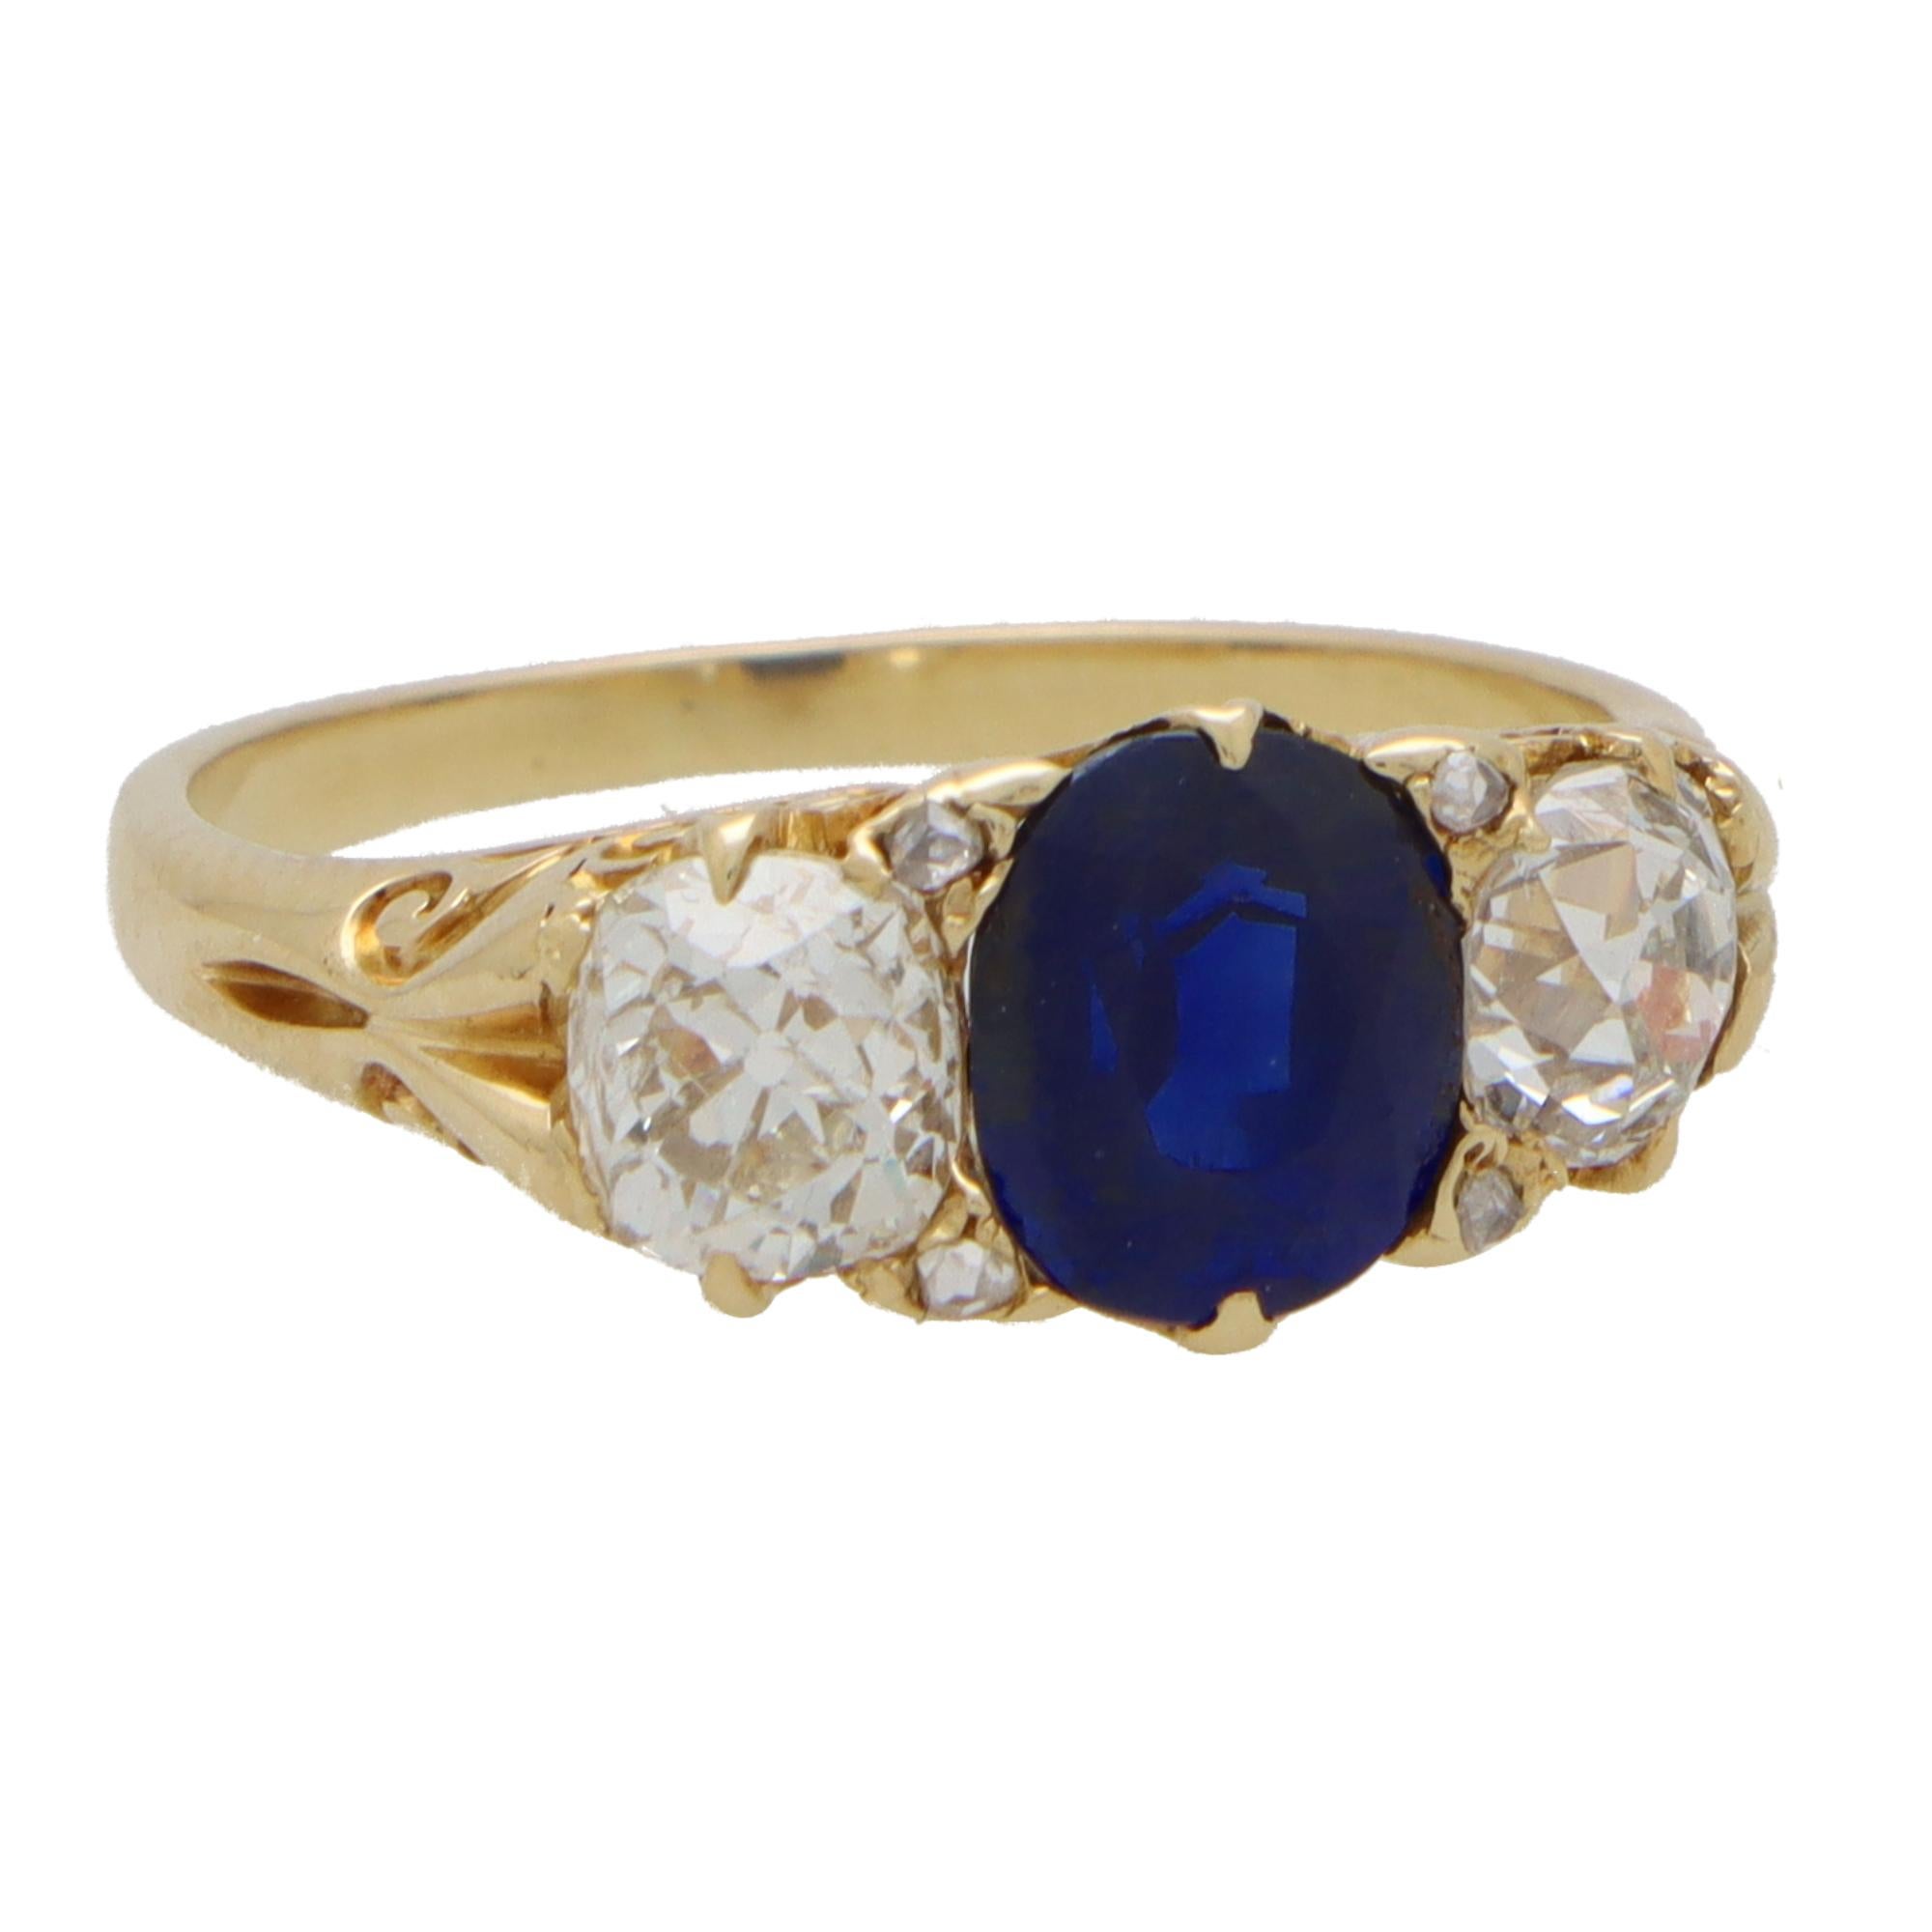 Women's or Men's Late Victorian Old Cut Diamond and Sapphire Three-Stone Ring in 18k Gold